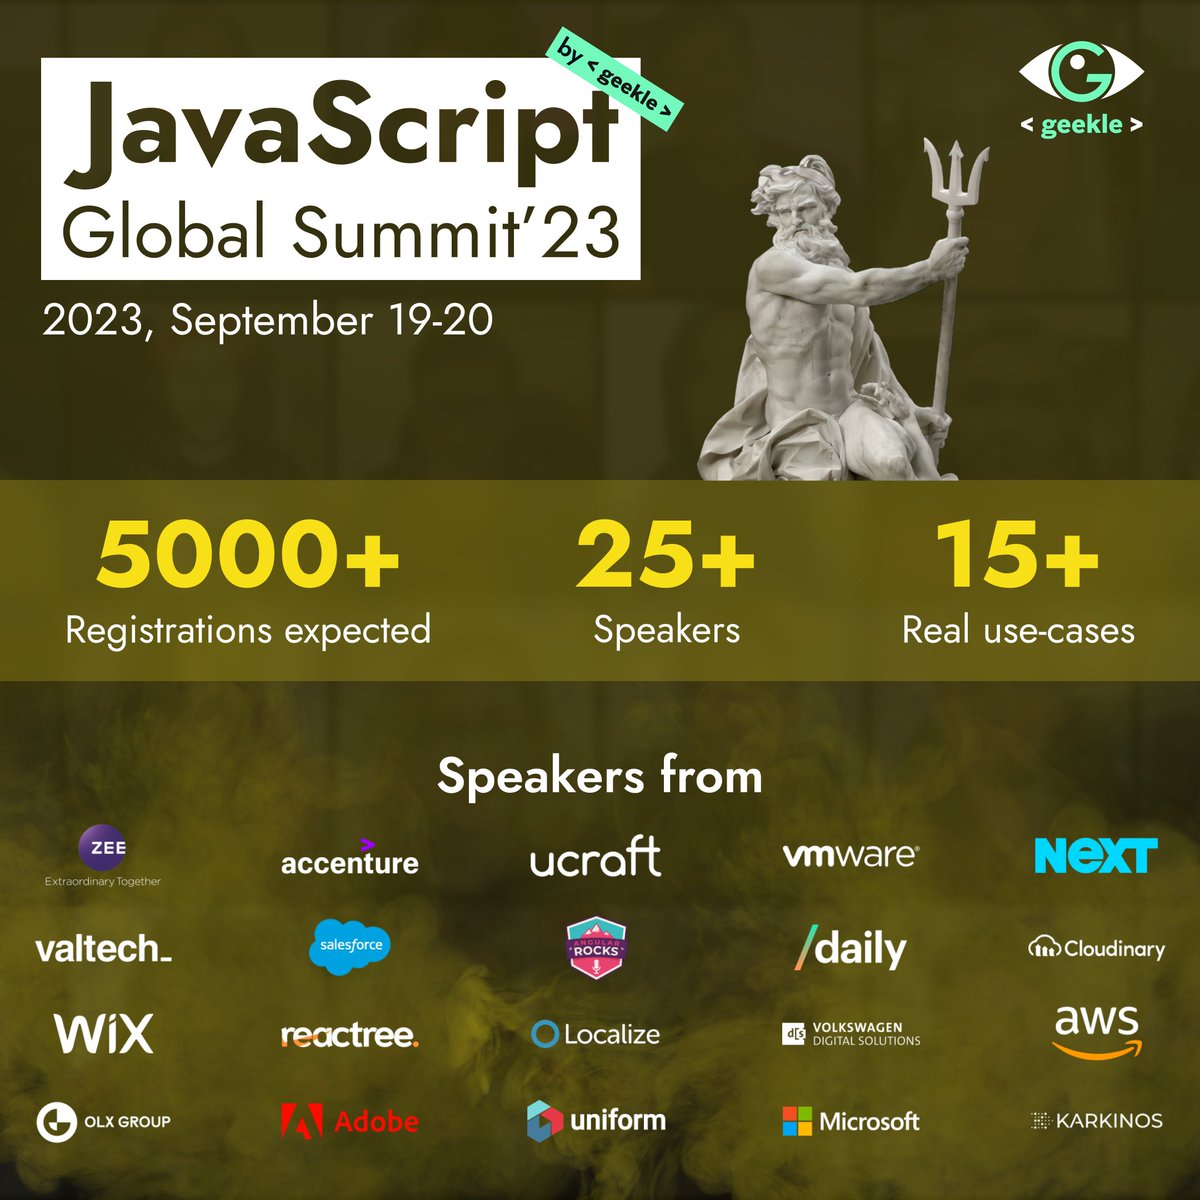 🚀JavaScript Global Summit'23🚀 2023, September 19-20 What is the event about? 💫React 💫Node.js 💫TypeScript 💫Web Components 💫Progressive Web Apps 💫Serverless Architecture Buy your early bird ticket now events.geekle.us/js23/